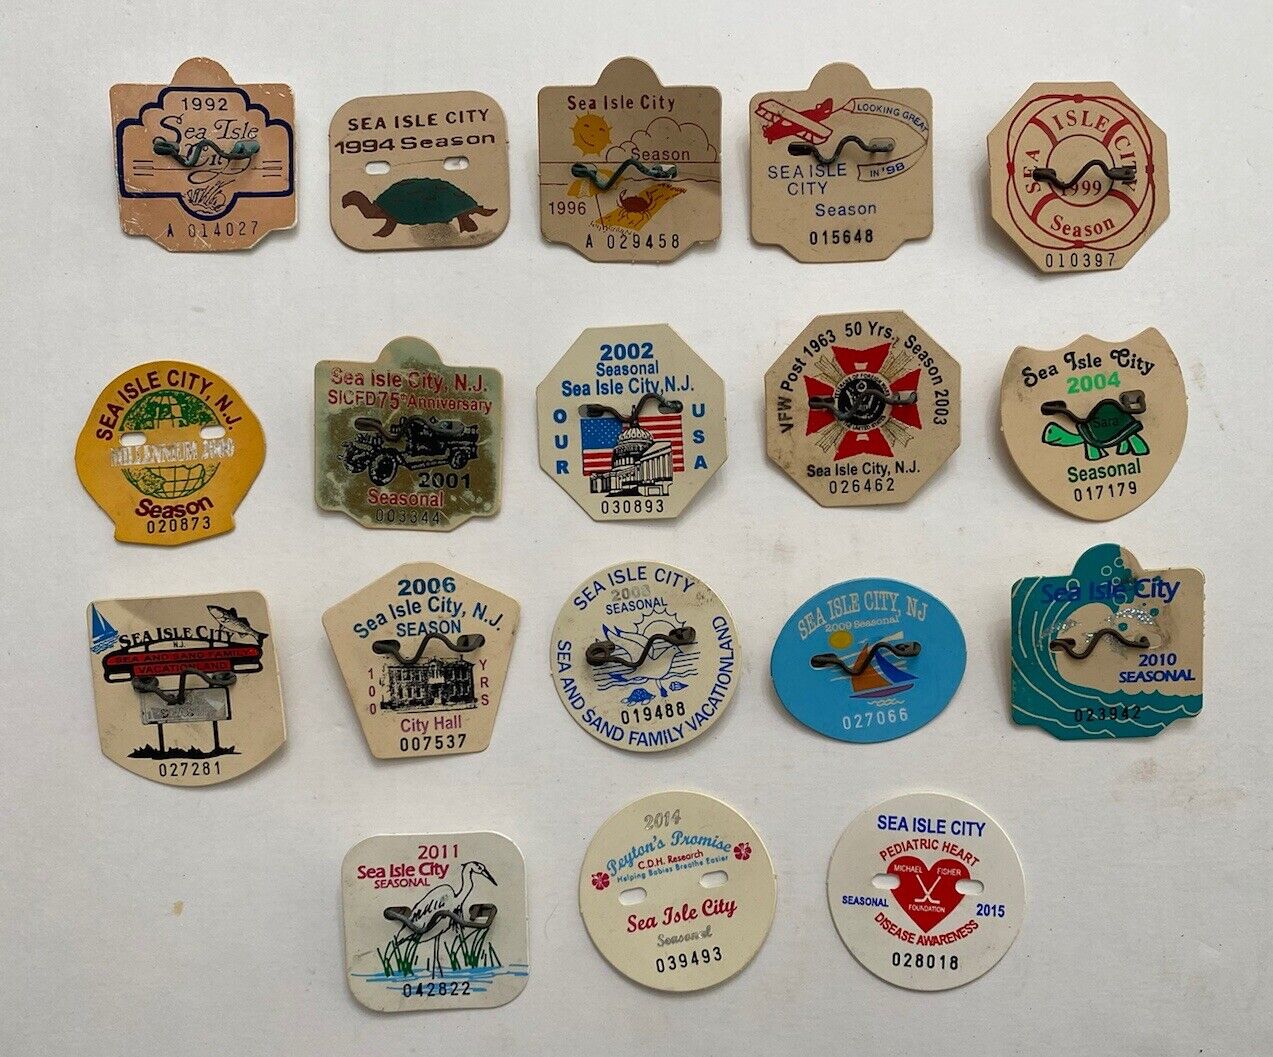 Sea Isle City NJ Beach Tag/Badge Collection 1992-2011 Lot of 18 New Jersey Shore